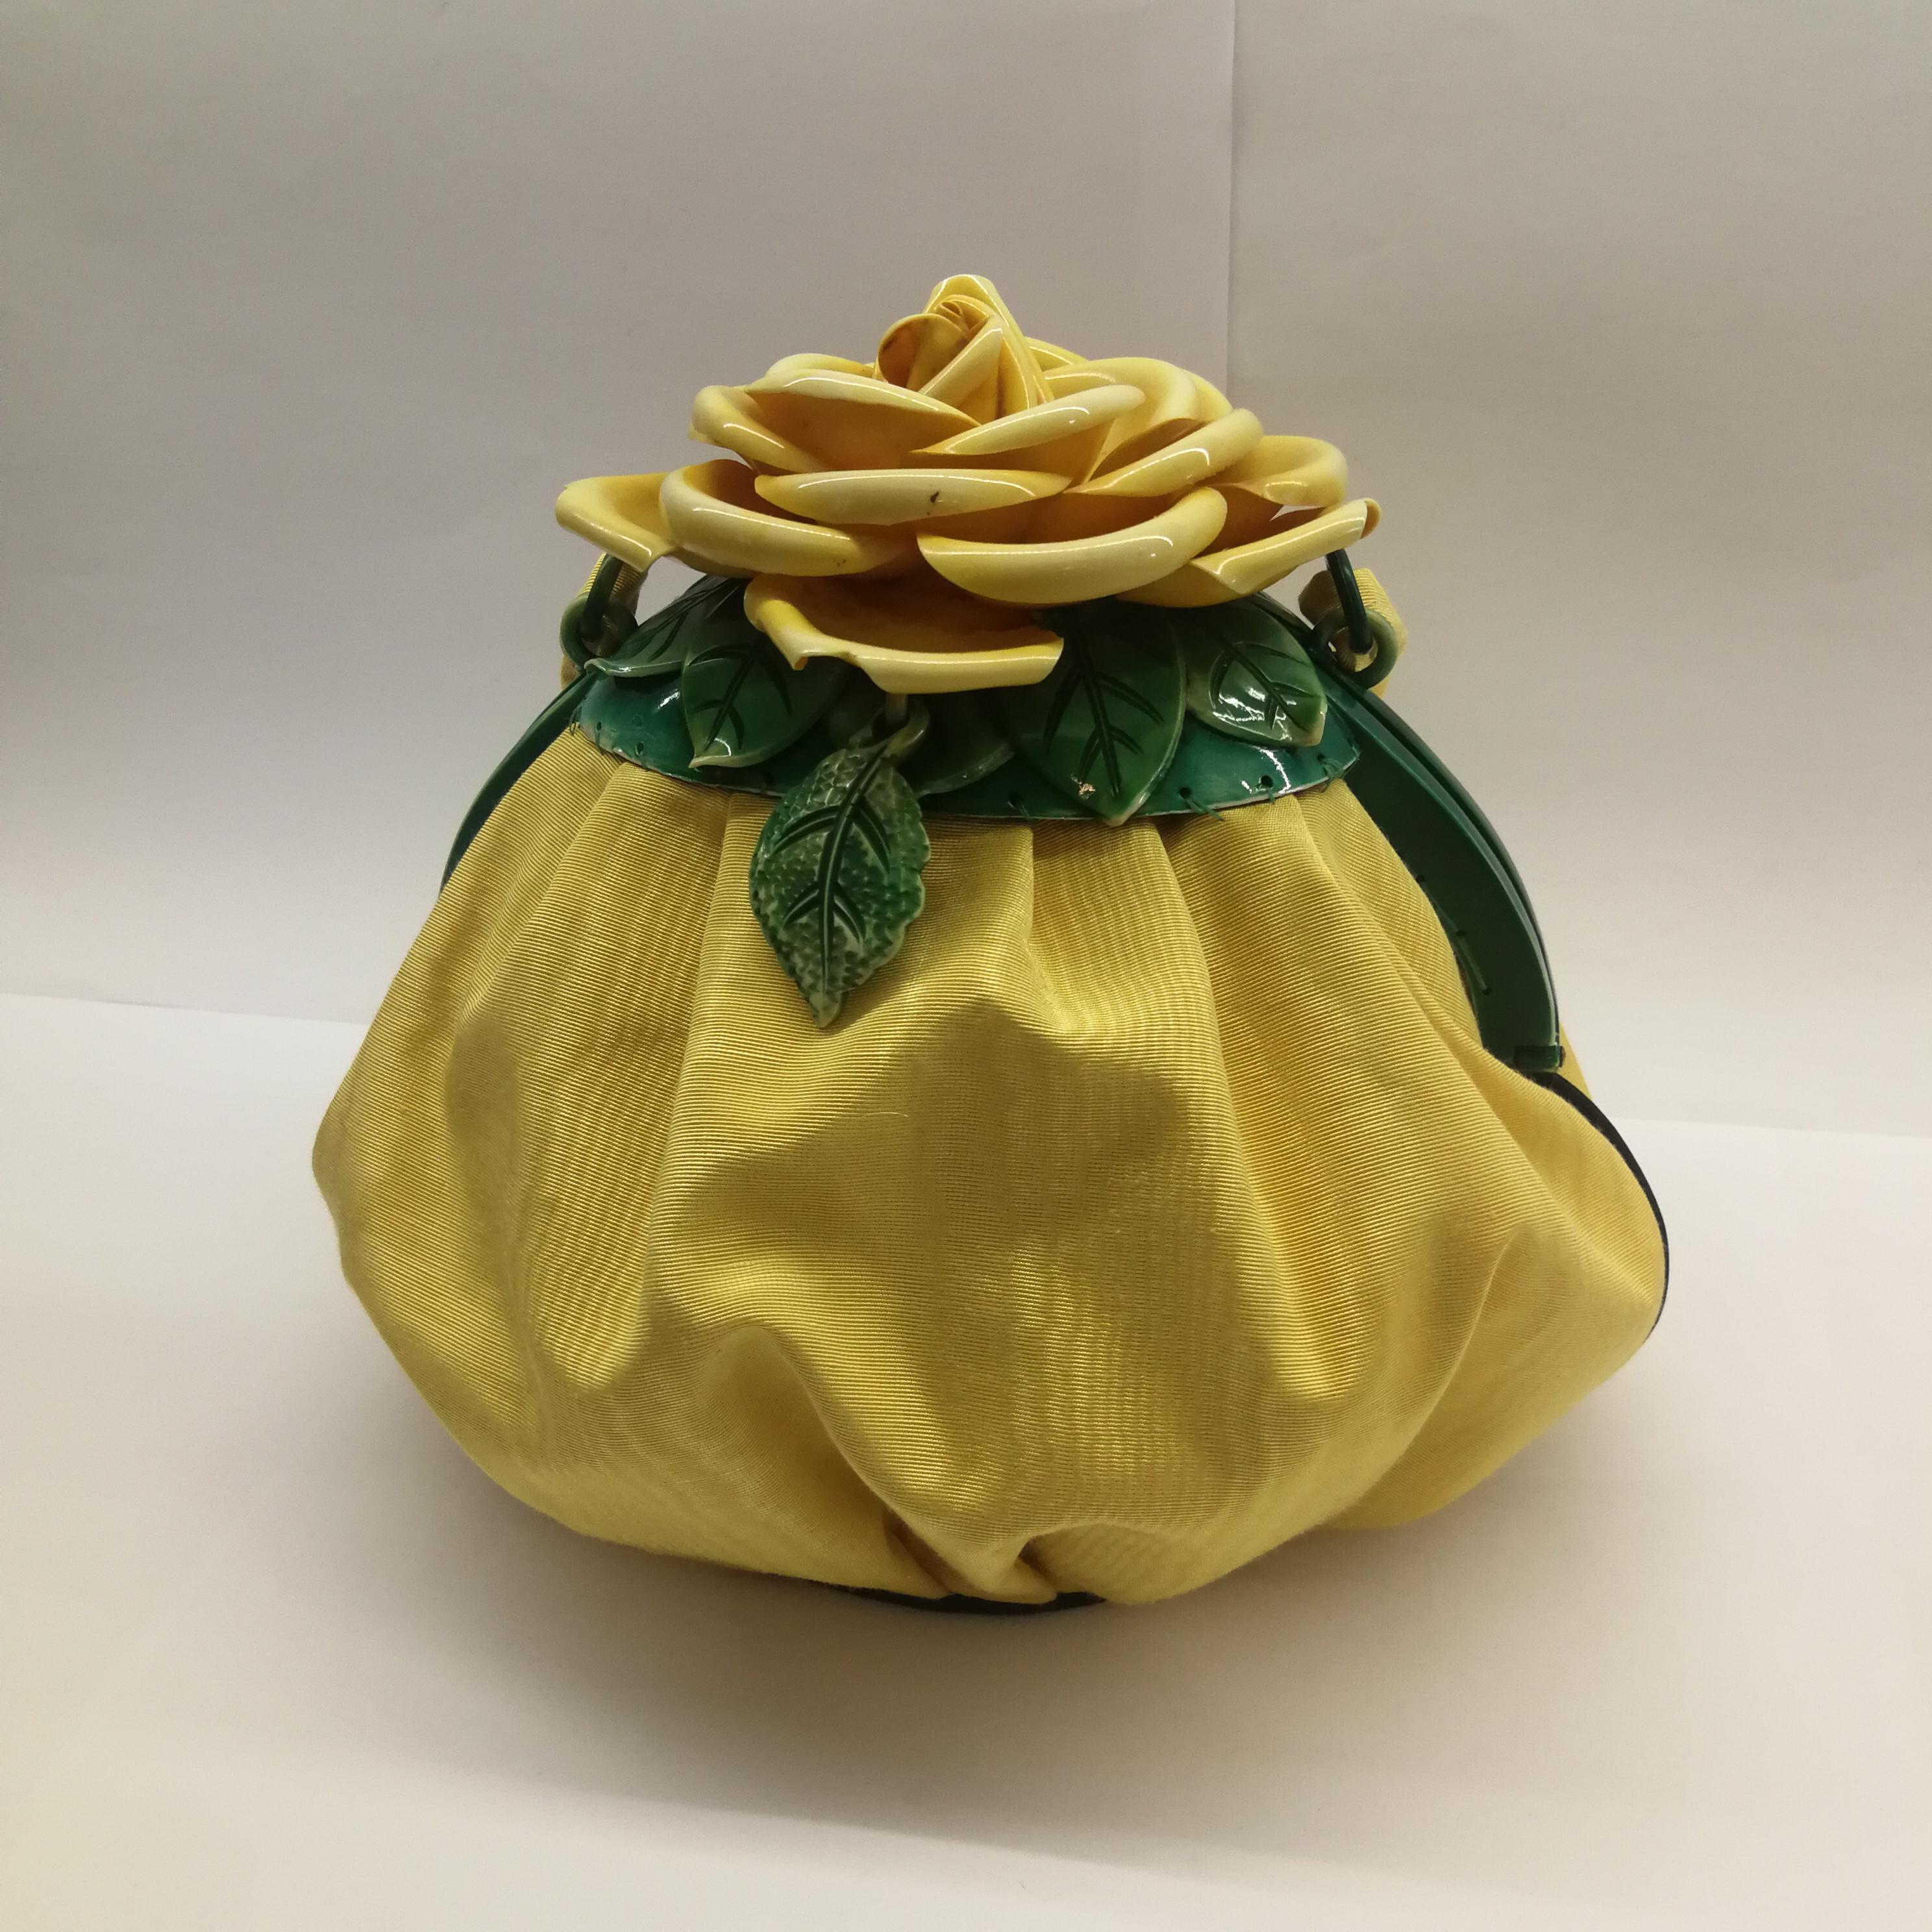 A very rare and outstanding yellow silk moire handbag, topped with a beautiful and intact hand painted celluloid 'rose', with green leaves. Handbags with these highly decorative and eye catching rose motifs are rare, but the size, design, colour and